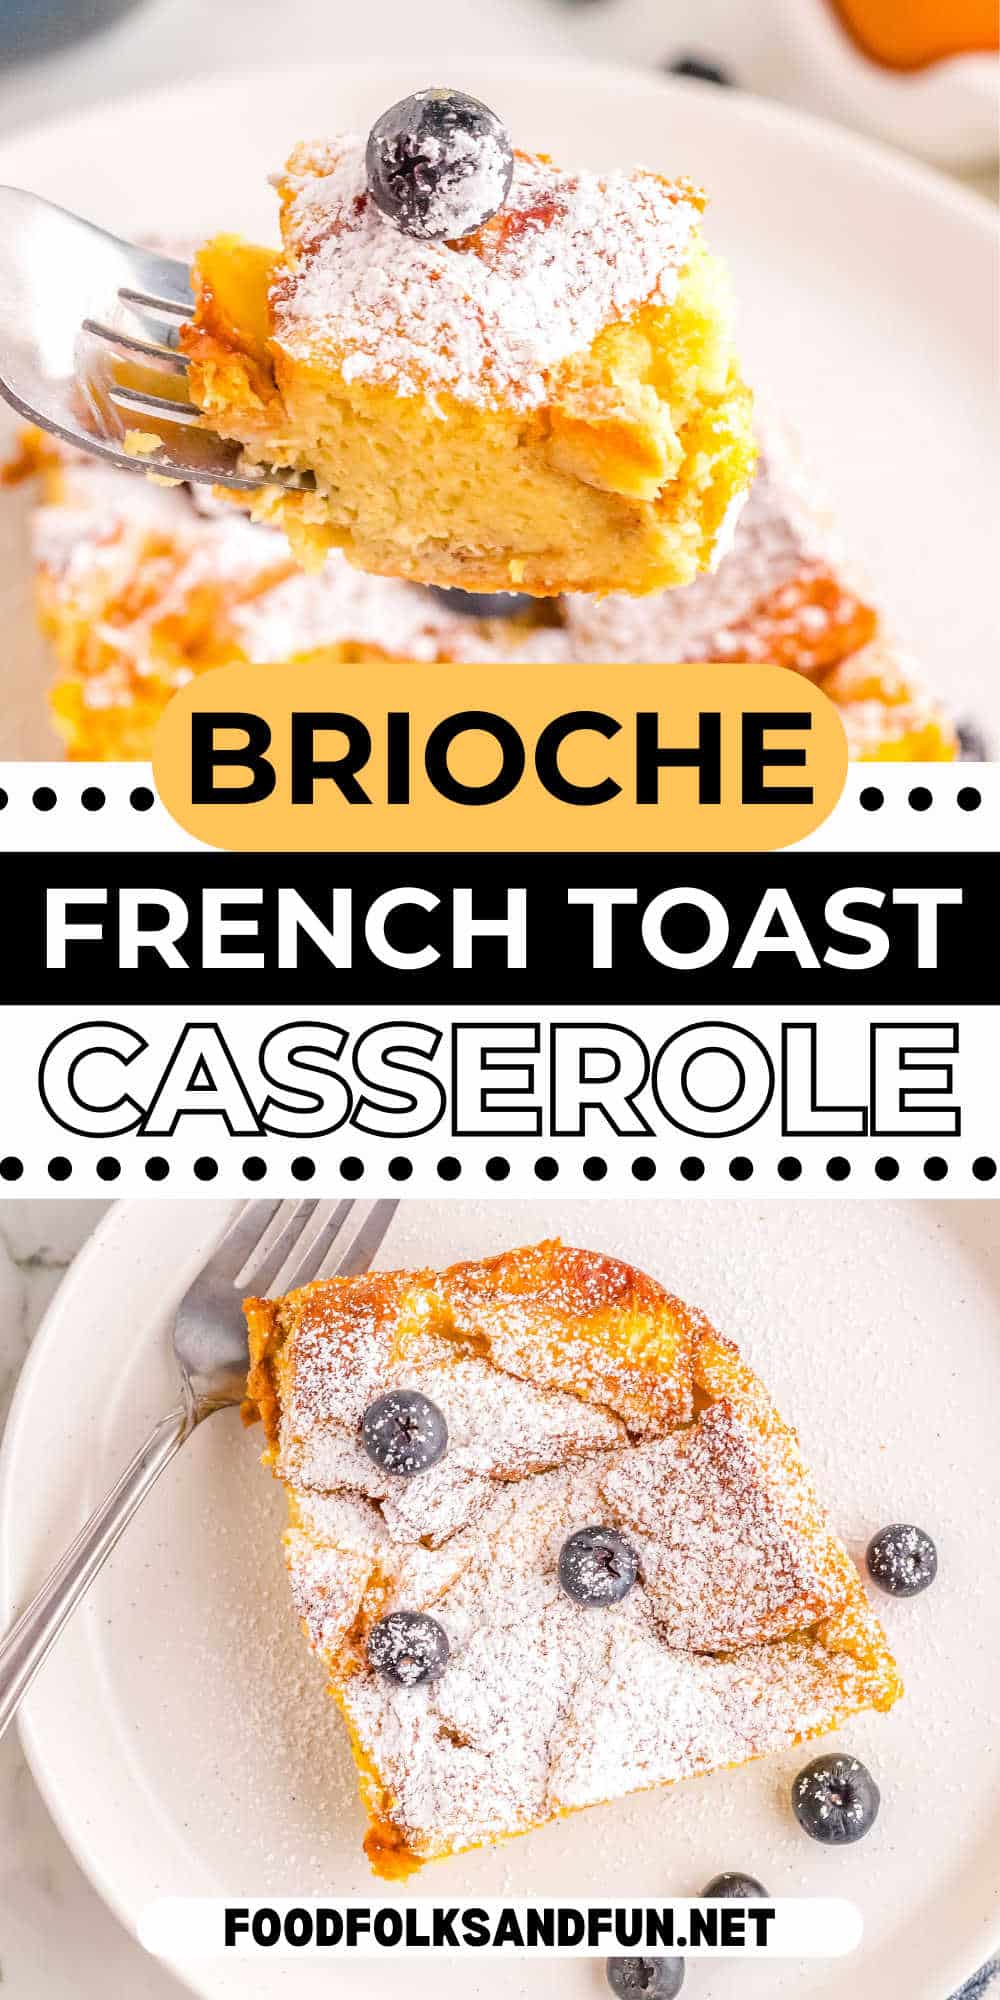 Brioche French Toast Casserole elevates the classic with fluffy, buttery chunks of brioche bathed in a dreamy, cinnamon-kissed custard.  via @foodfolksandfun